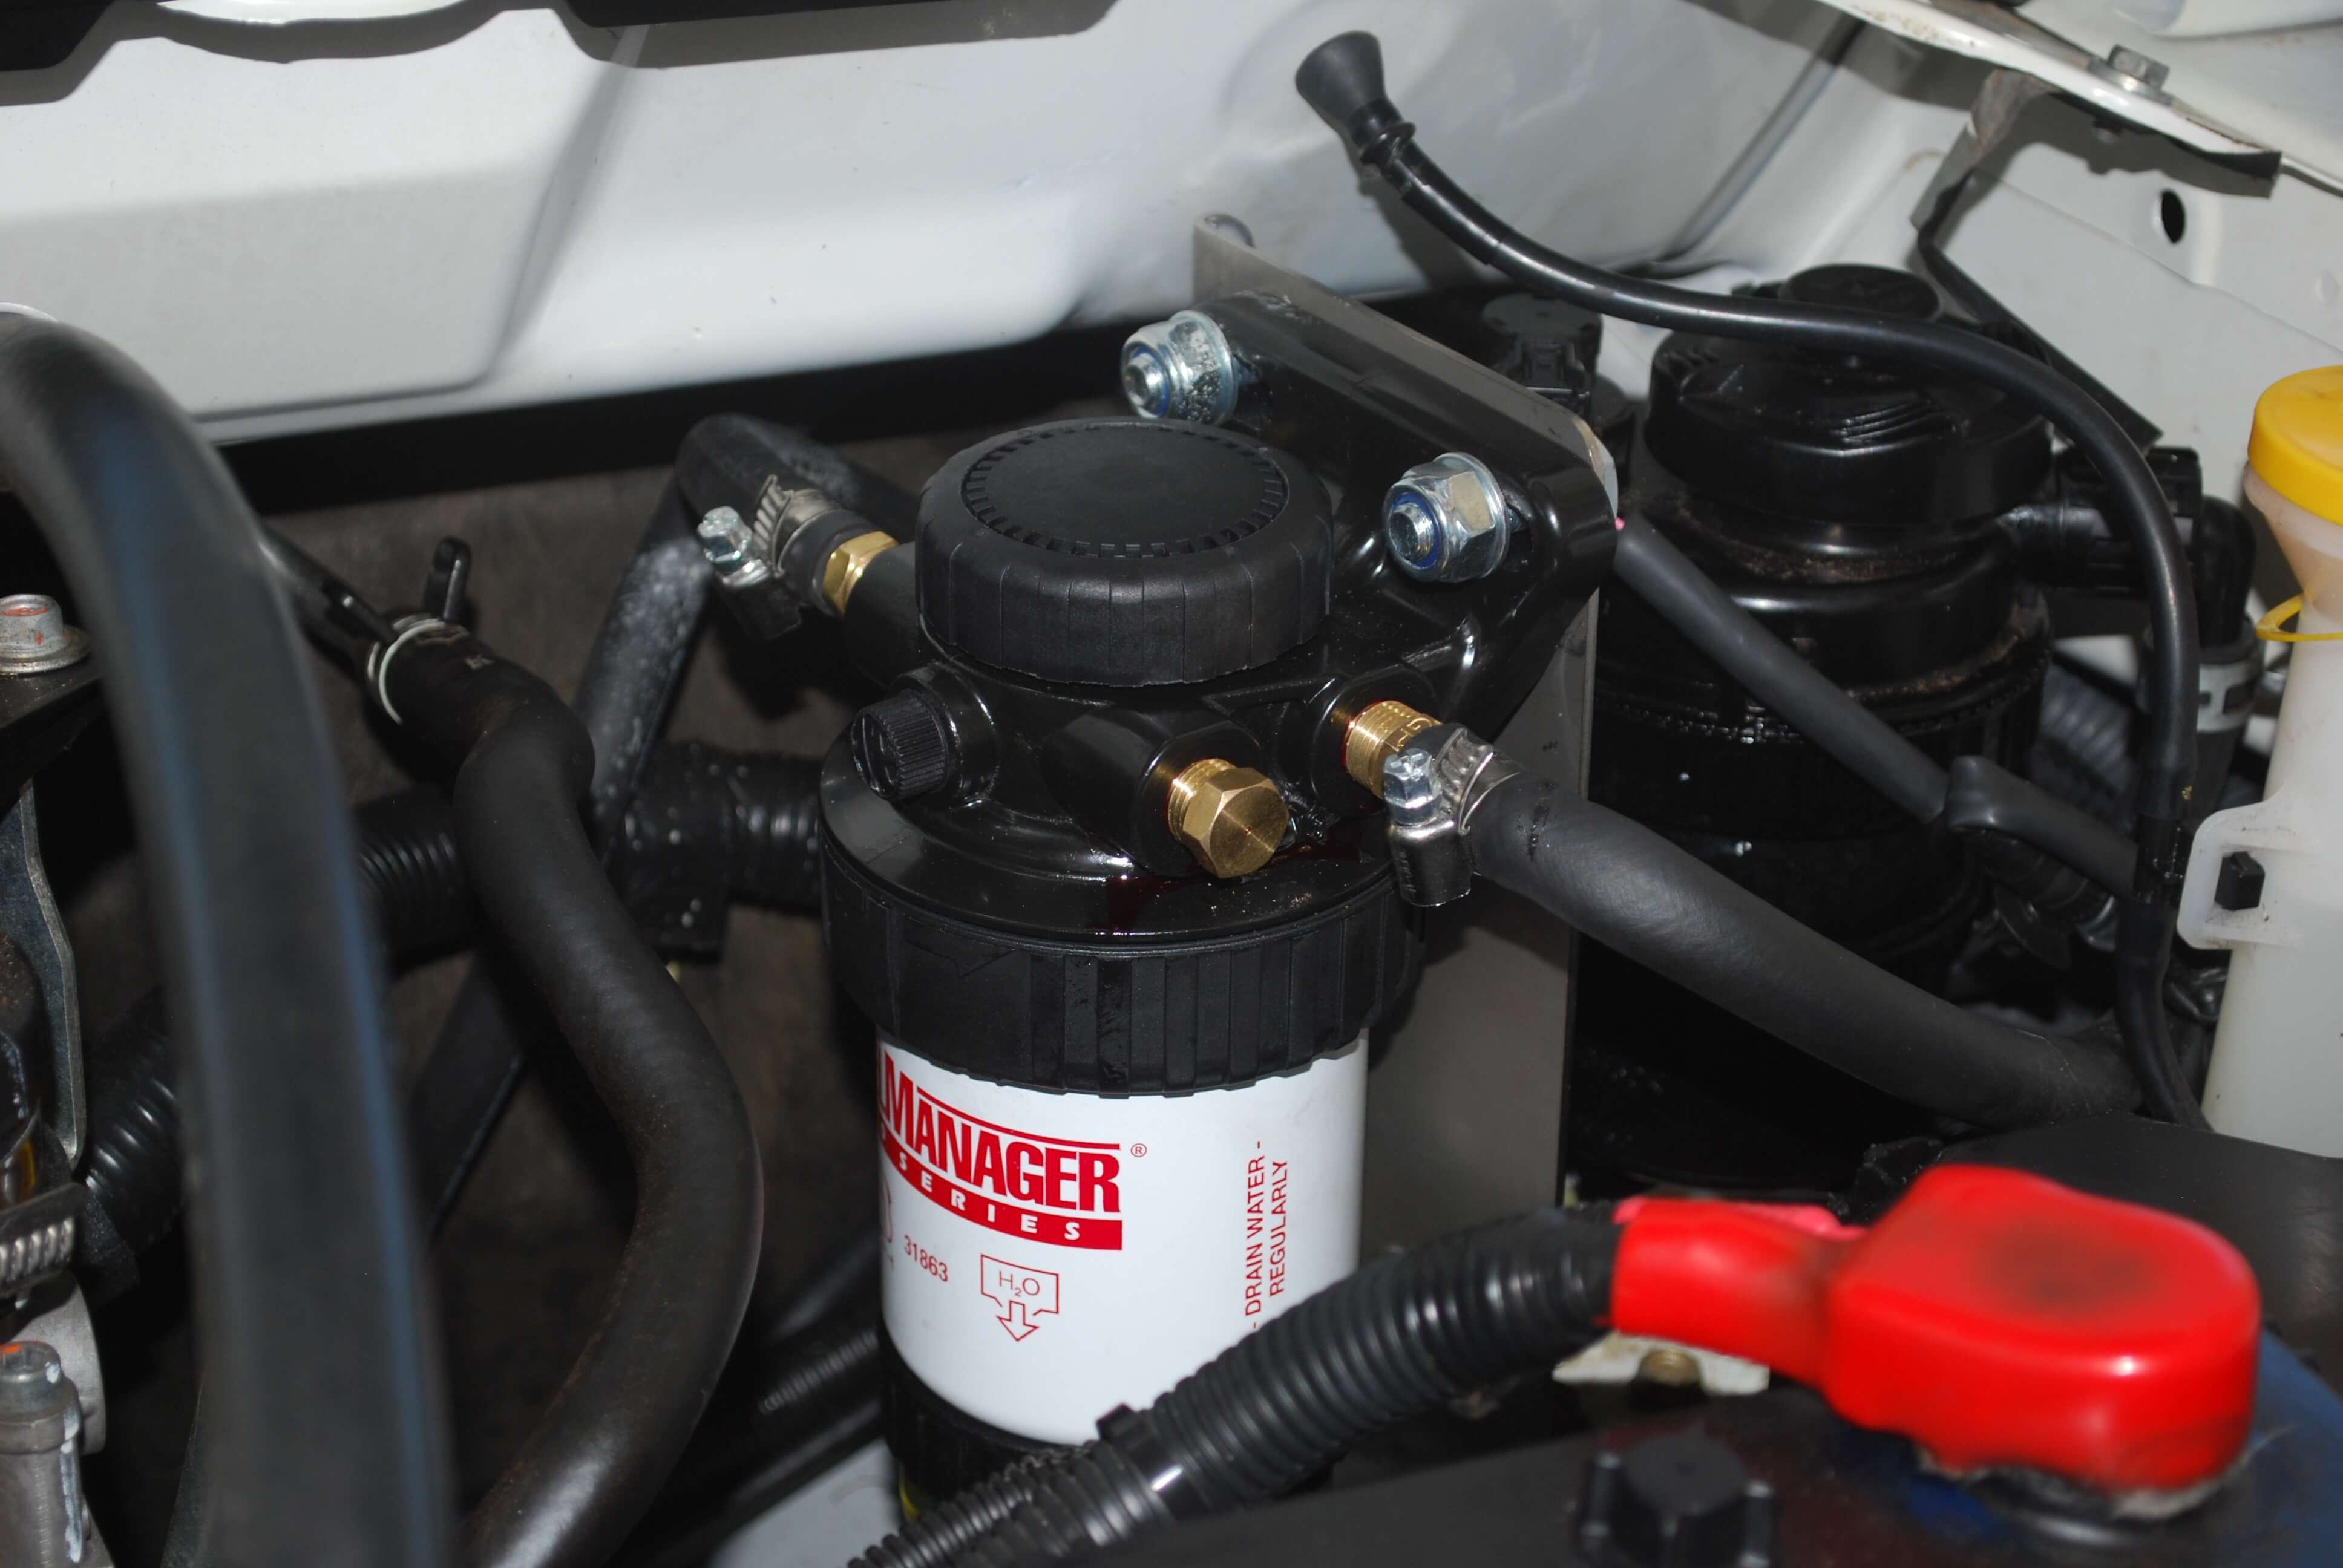 Secondary Fuel Filtration, what is it and do I need it for my vehicle? 